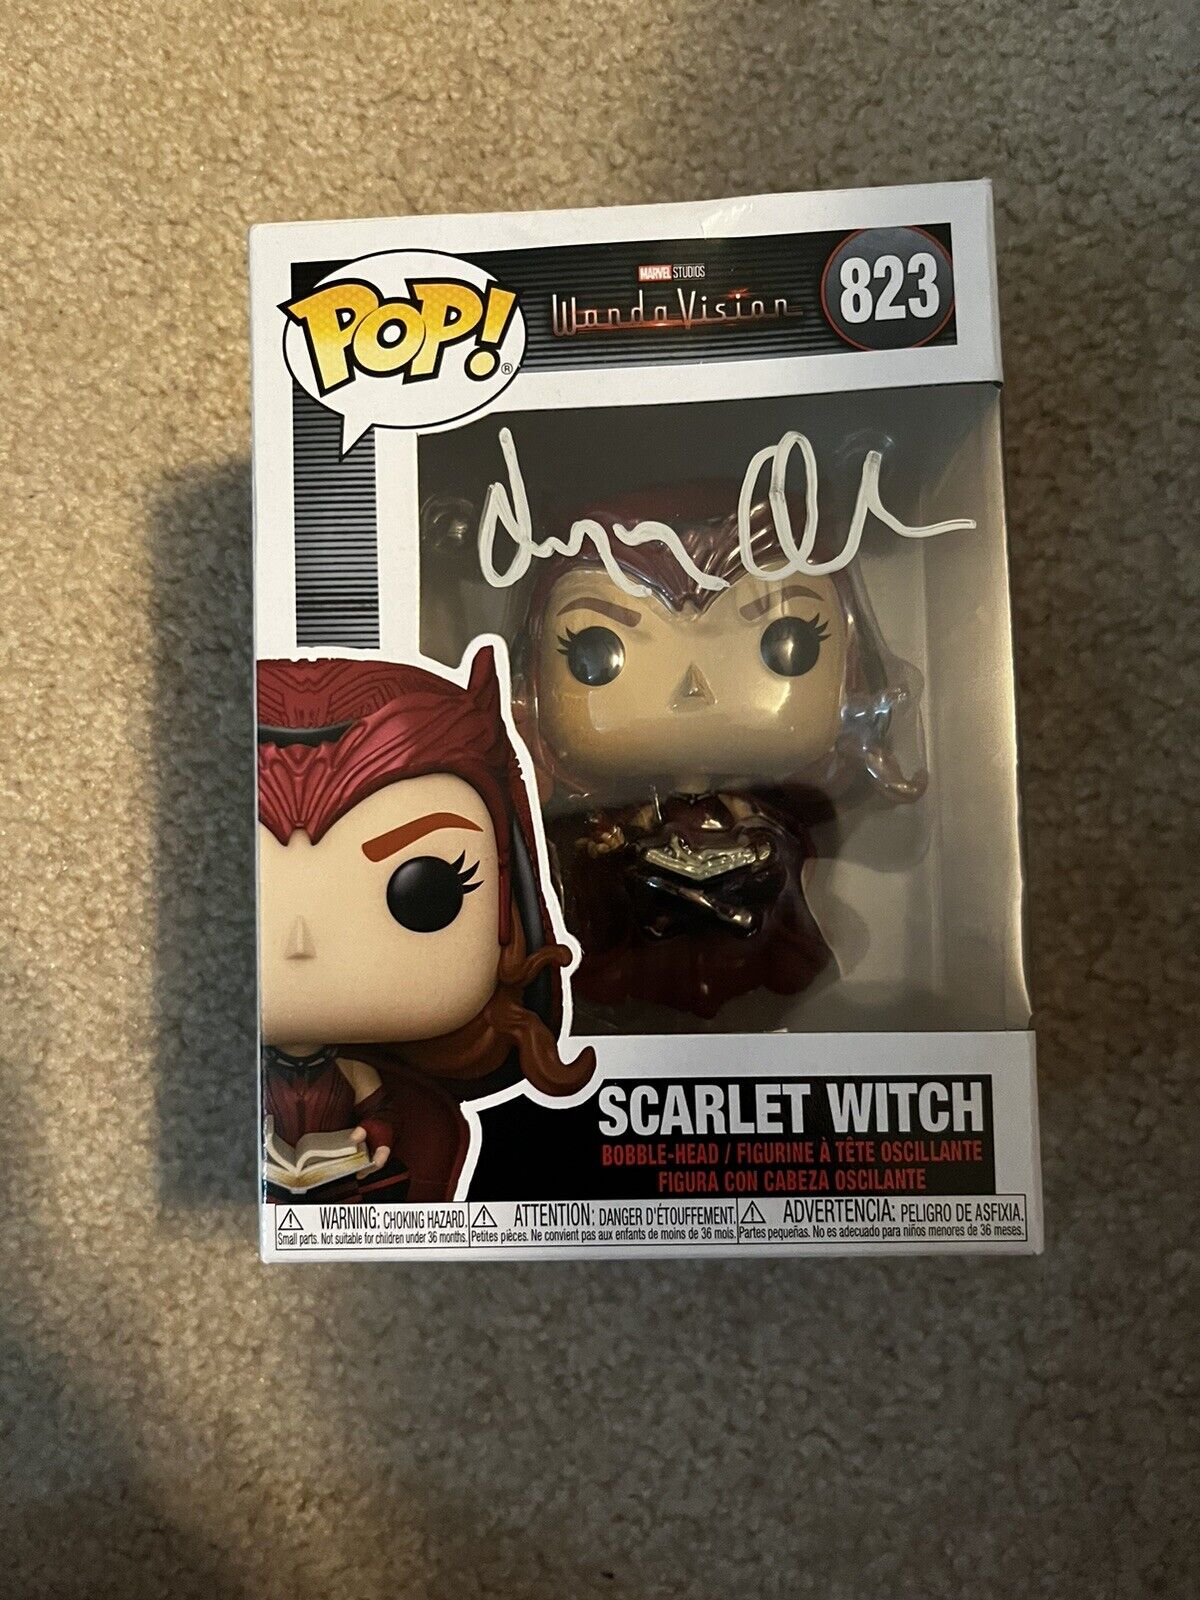 Scarlet Witch Autographed #823 Funko Pop **AUTHETICATED BY OFFICIAL PIX**